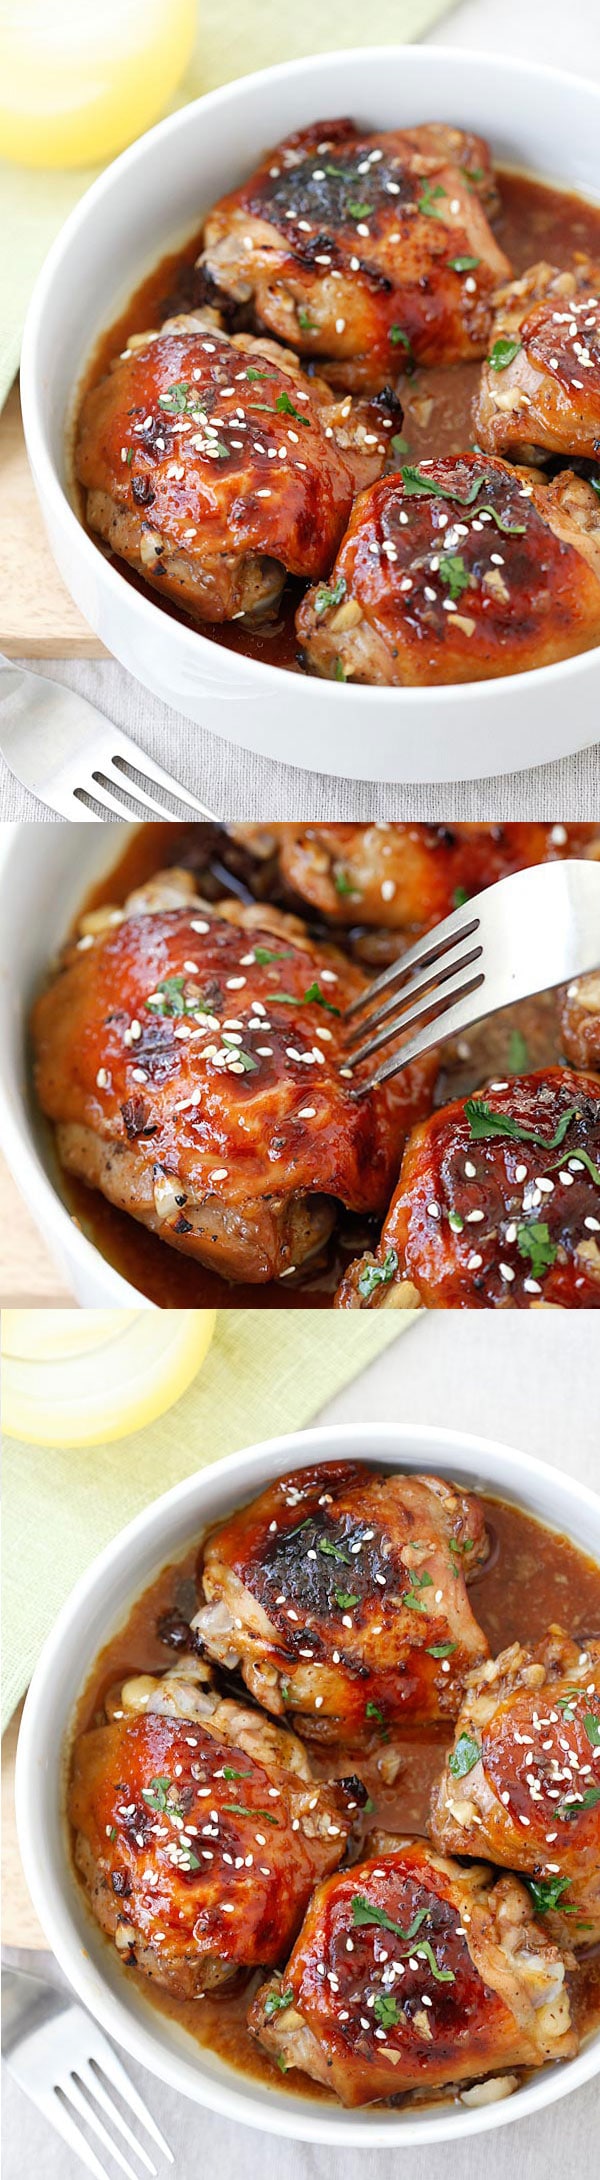 Baked Honey Soy Chicken - moist, tender and juicy chicken thighs marinated with honey, soy sauce, ginger, garlic and baked in oven. Easy dinner for the family! | rasamalaysia.com